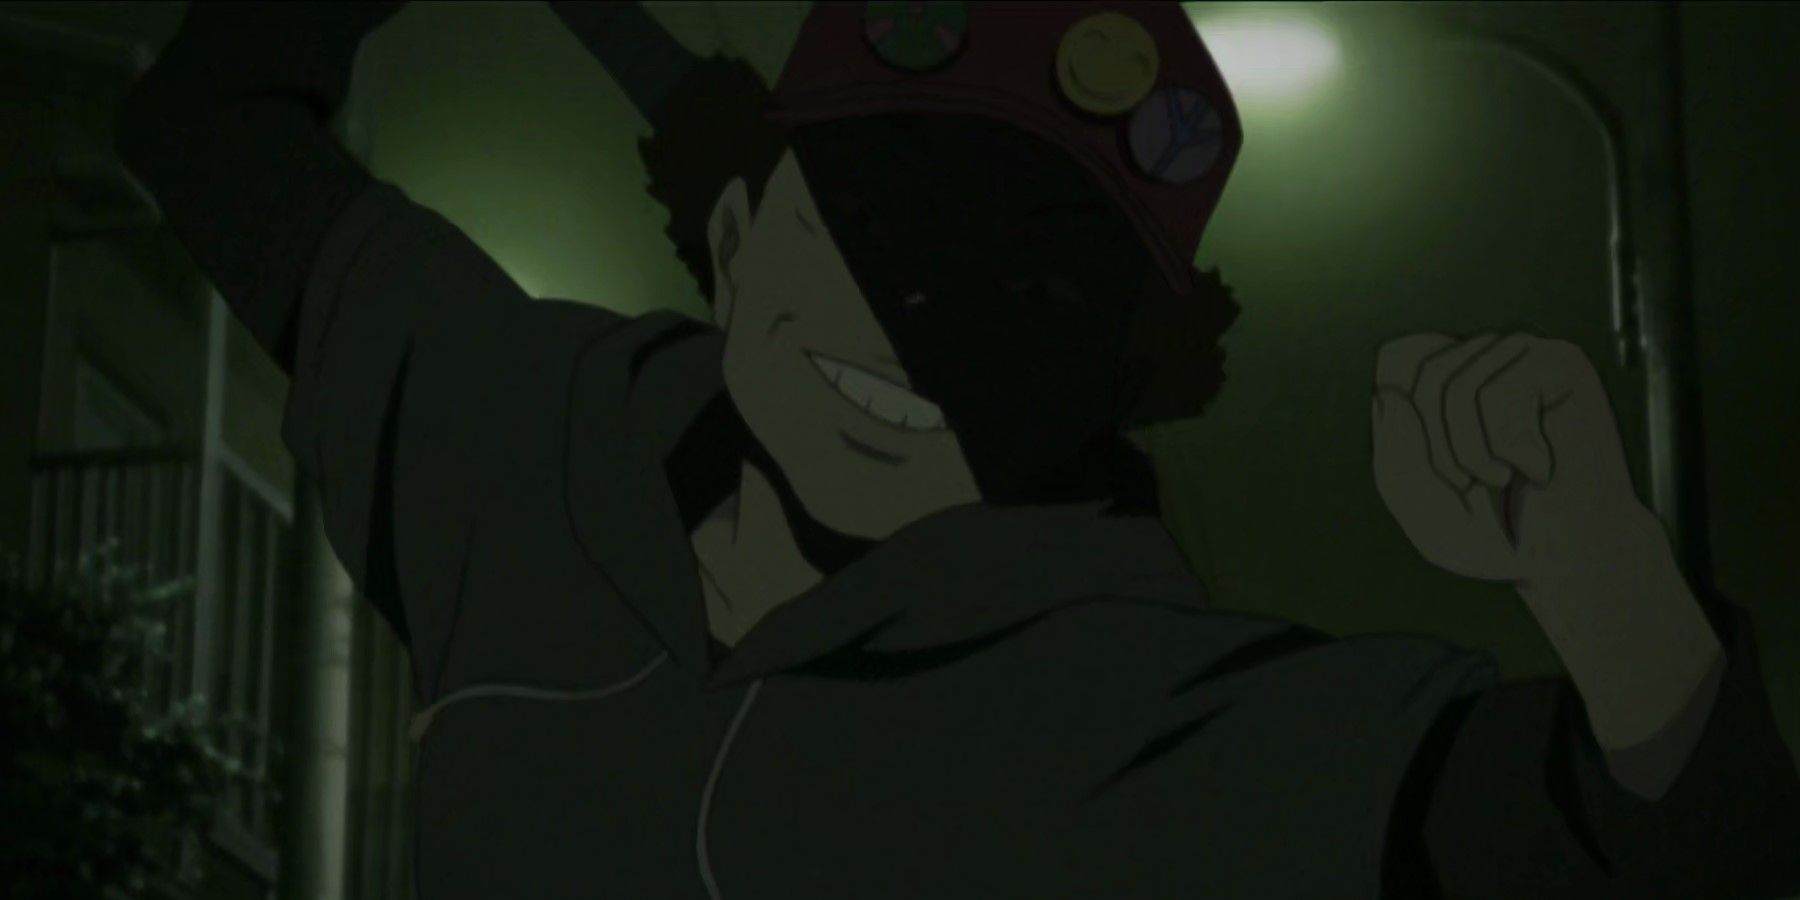 FEATURE: Happy Family Planning Brings Laughter to the Shadows of Paranoia  Agent - Crunchyroll News